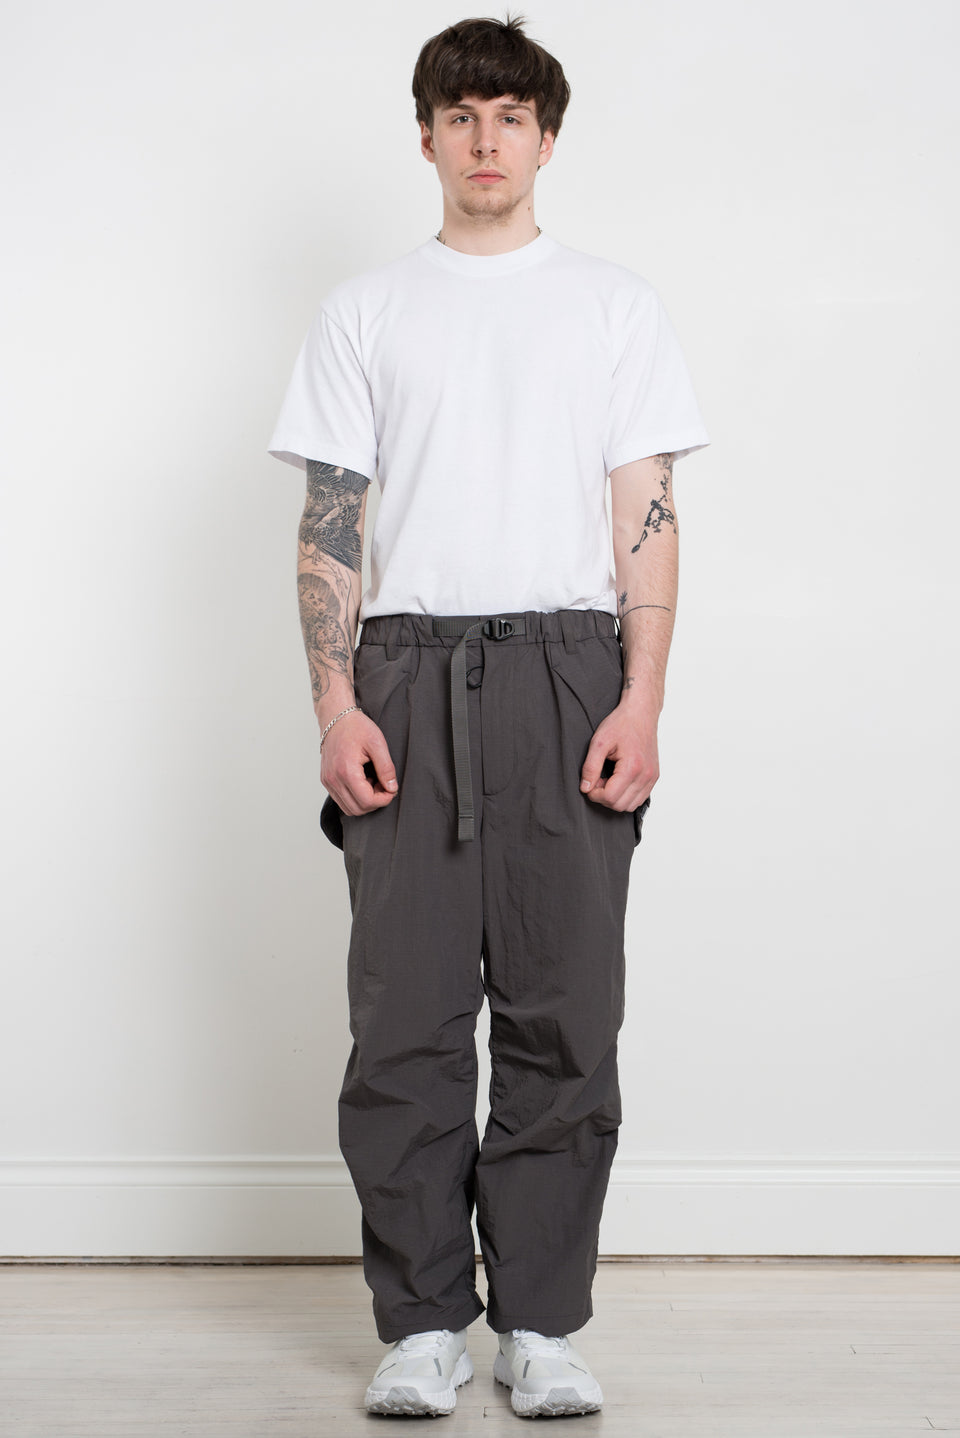 CMF Outdoor Garment 23SS SS23 Comfy Outdoor Garment m65 Pants Charcoal Calculus Victoria BC Canada